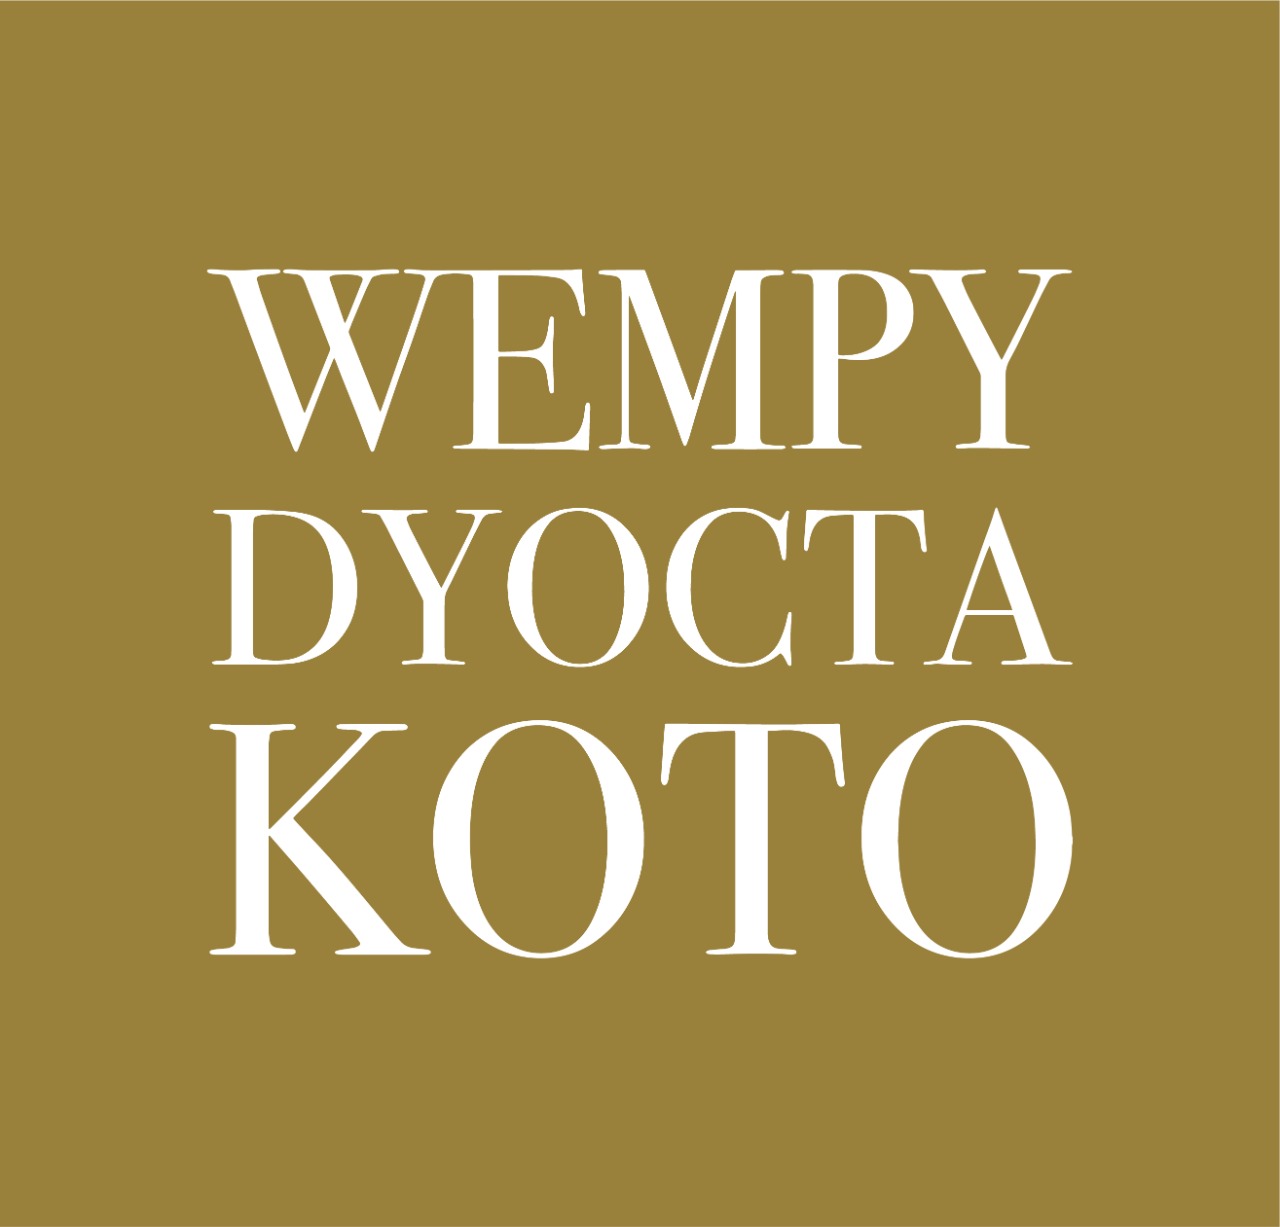 Wempy Dyocta Koto Fast Gaining Recognition As Brand For Next Generation Of Conscious Creators